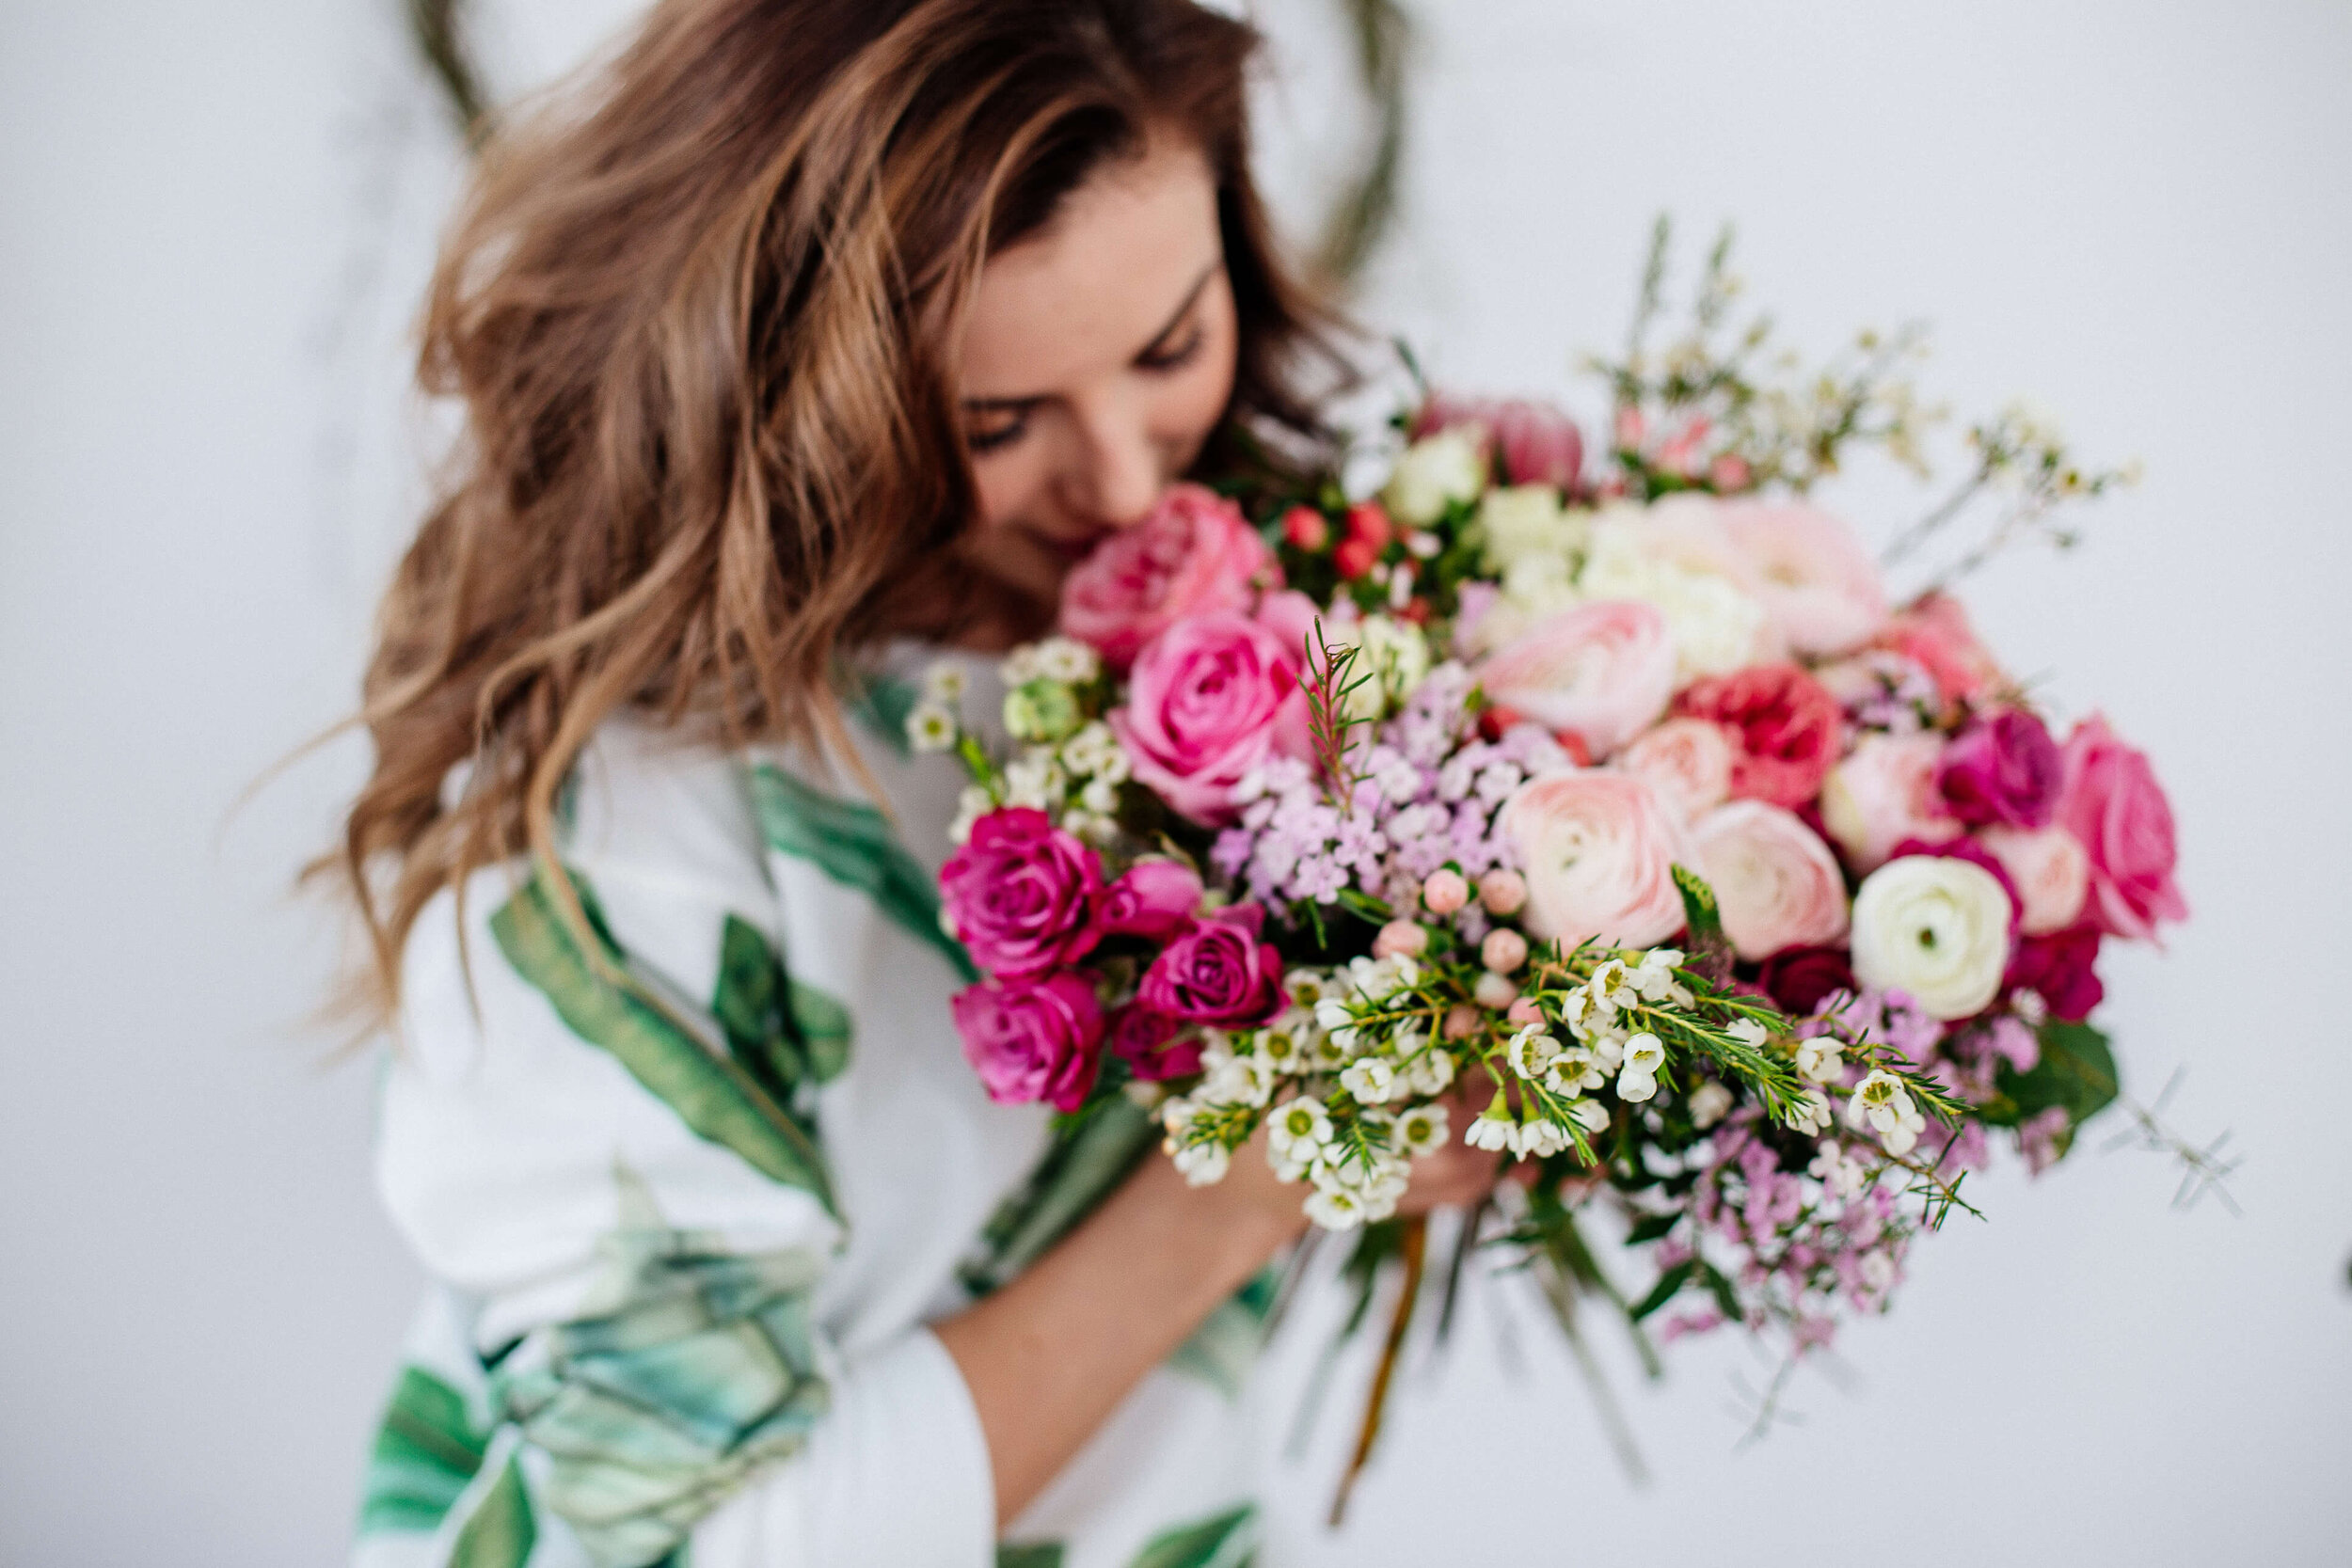 Florist With Flowers |